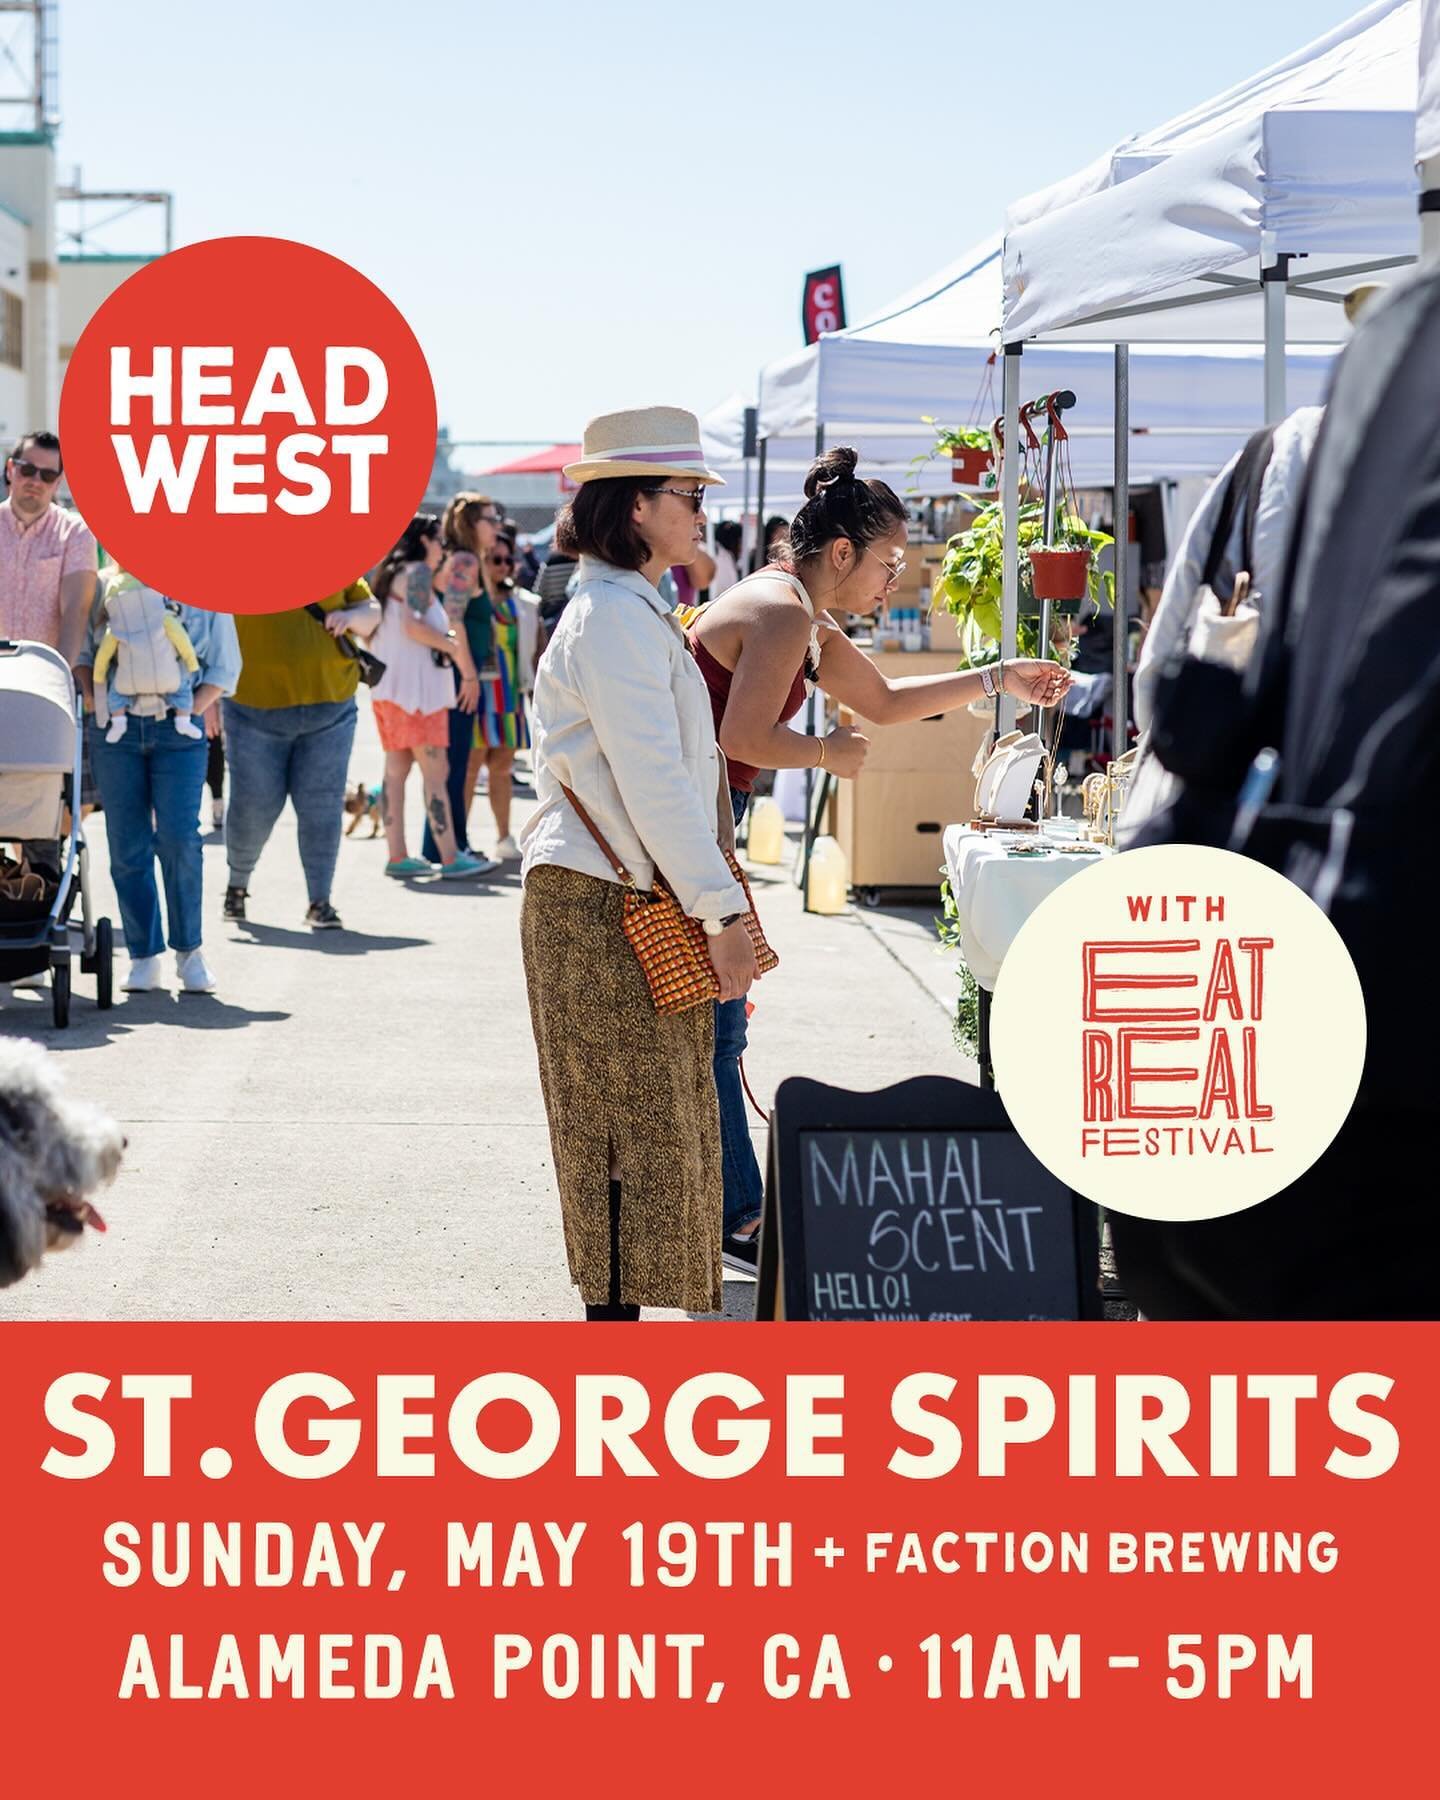 🌞 HEAD WEST THIS SUNDAY | St. George Spirits in Alameda 🌞
.
Come out and join us in the sunshine this SUNDAY, May  19th from 11a - 5p as we return to Alameda Point for HEAD WEST at @stgeorgespirits 🍸🥃✨
.
📍Located at 2601 Monarch St Alameda, CA ✨